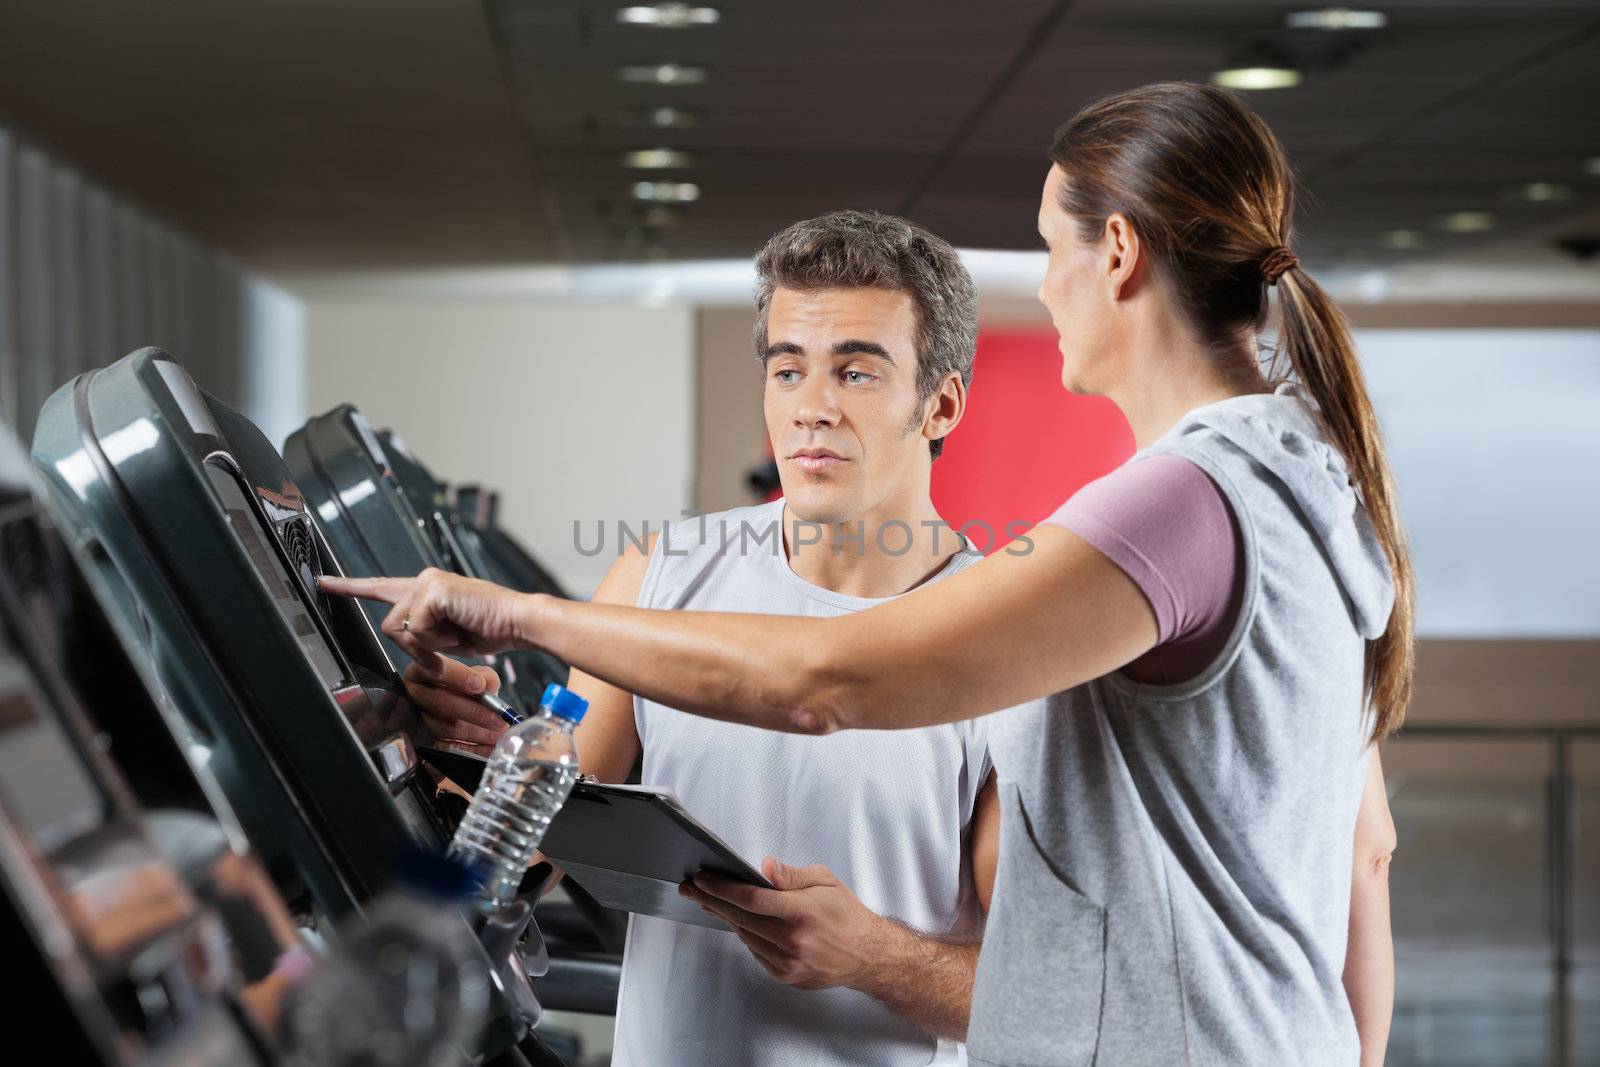 Woman Asking About Machines In Gym by leaf